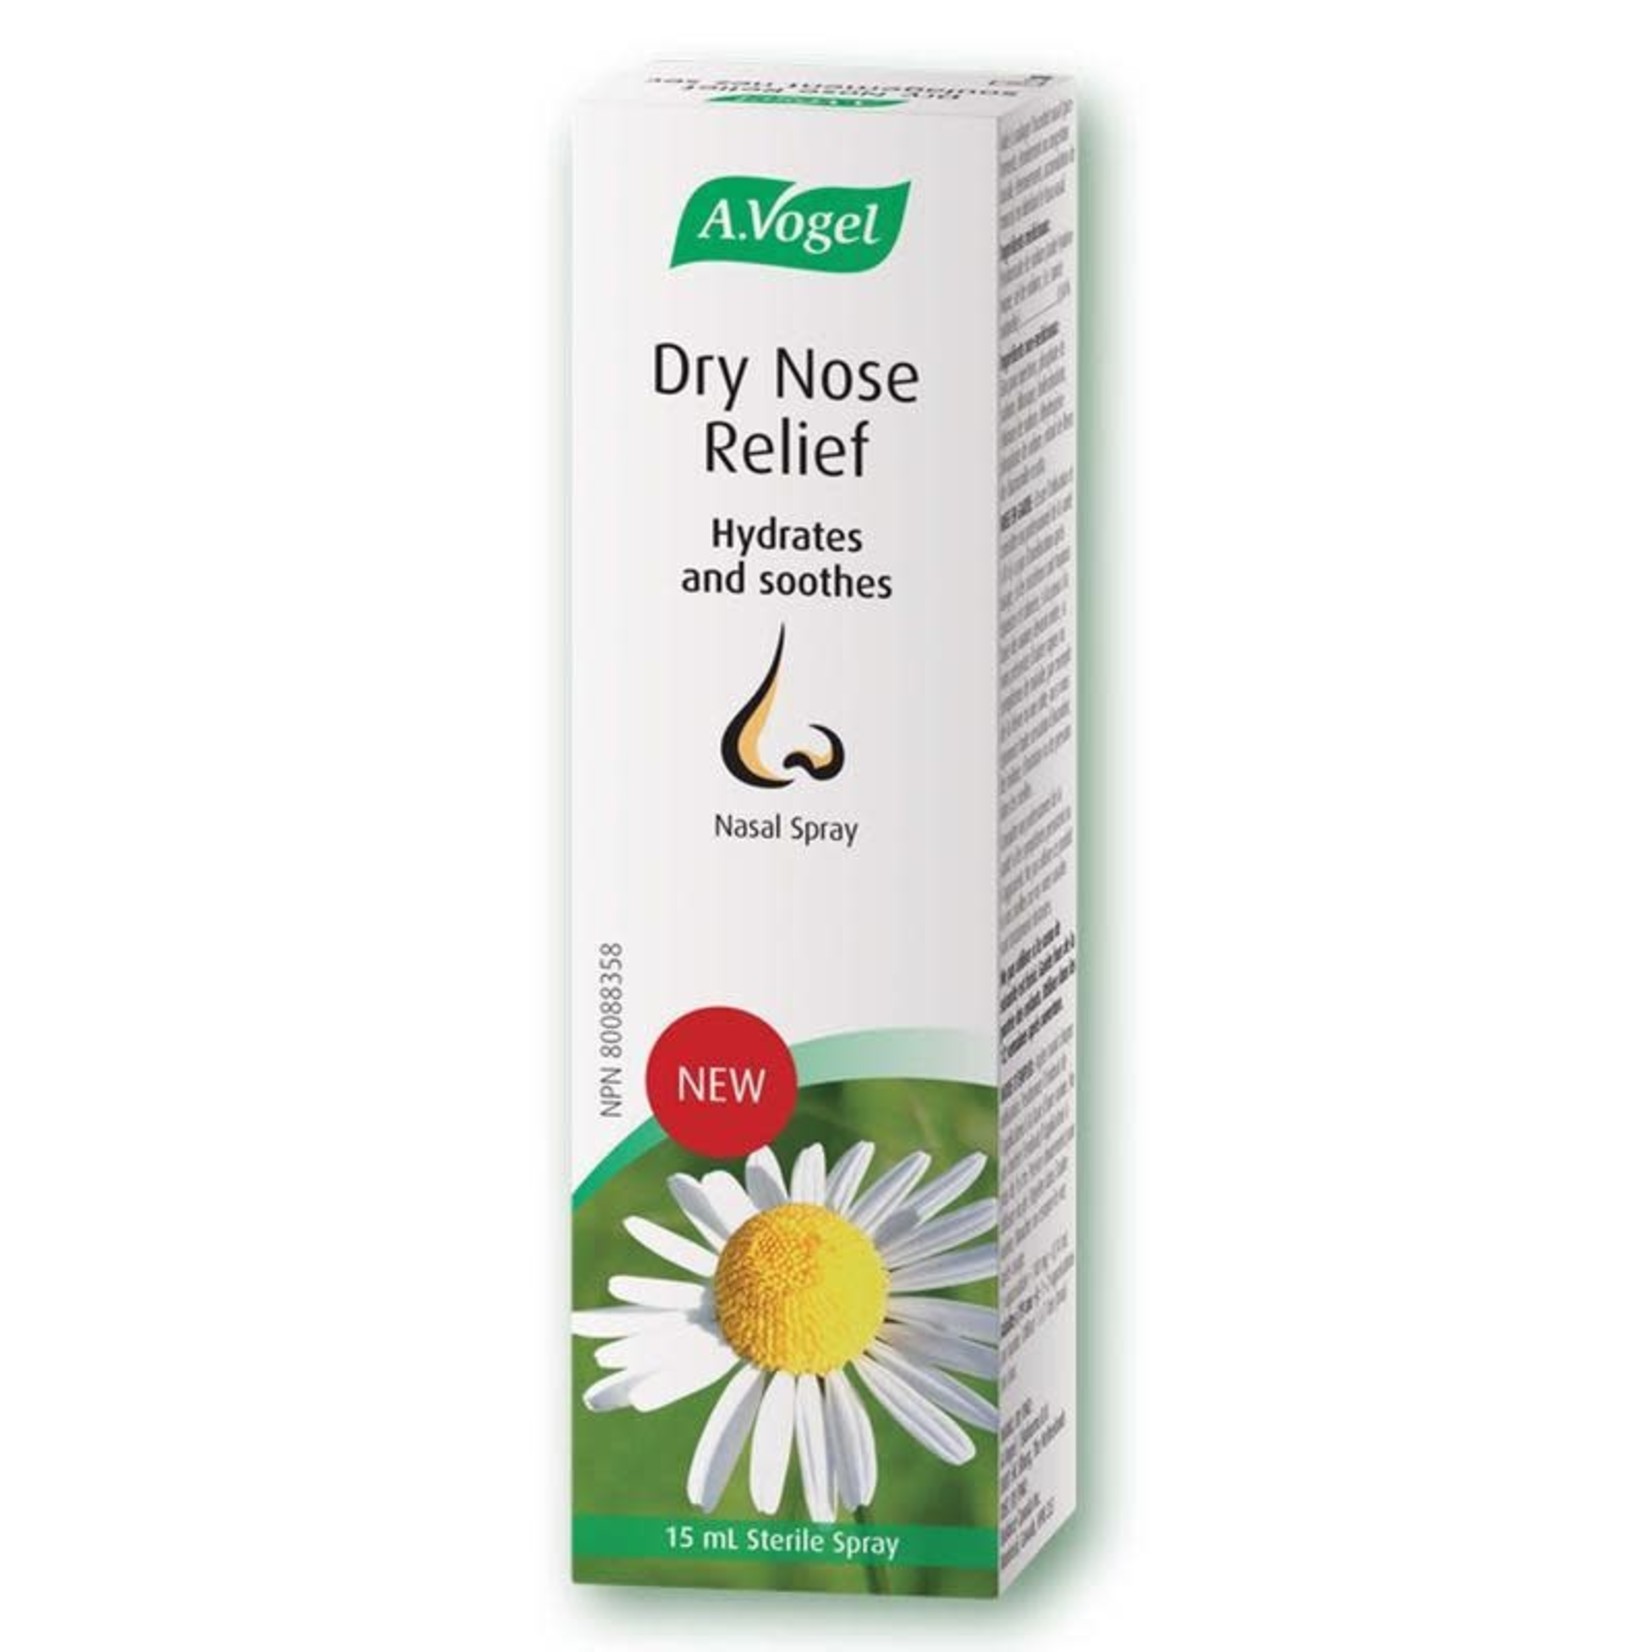 A.VOGEL A VOGEL DRY NOSE RELIEF 15ML